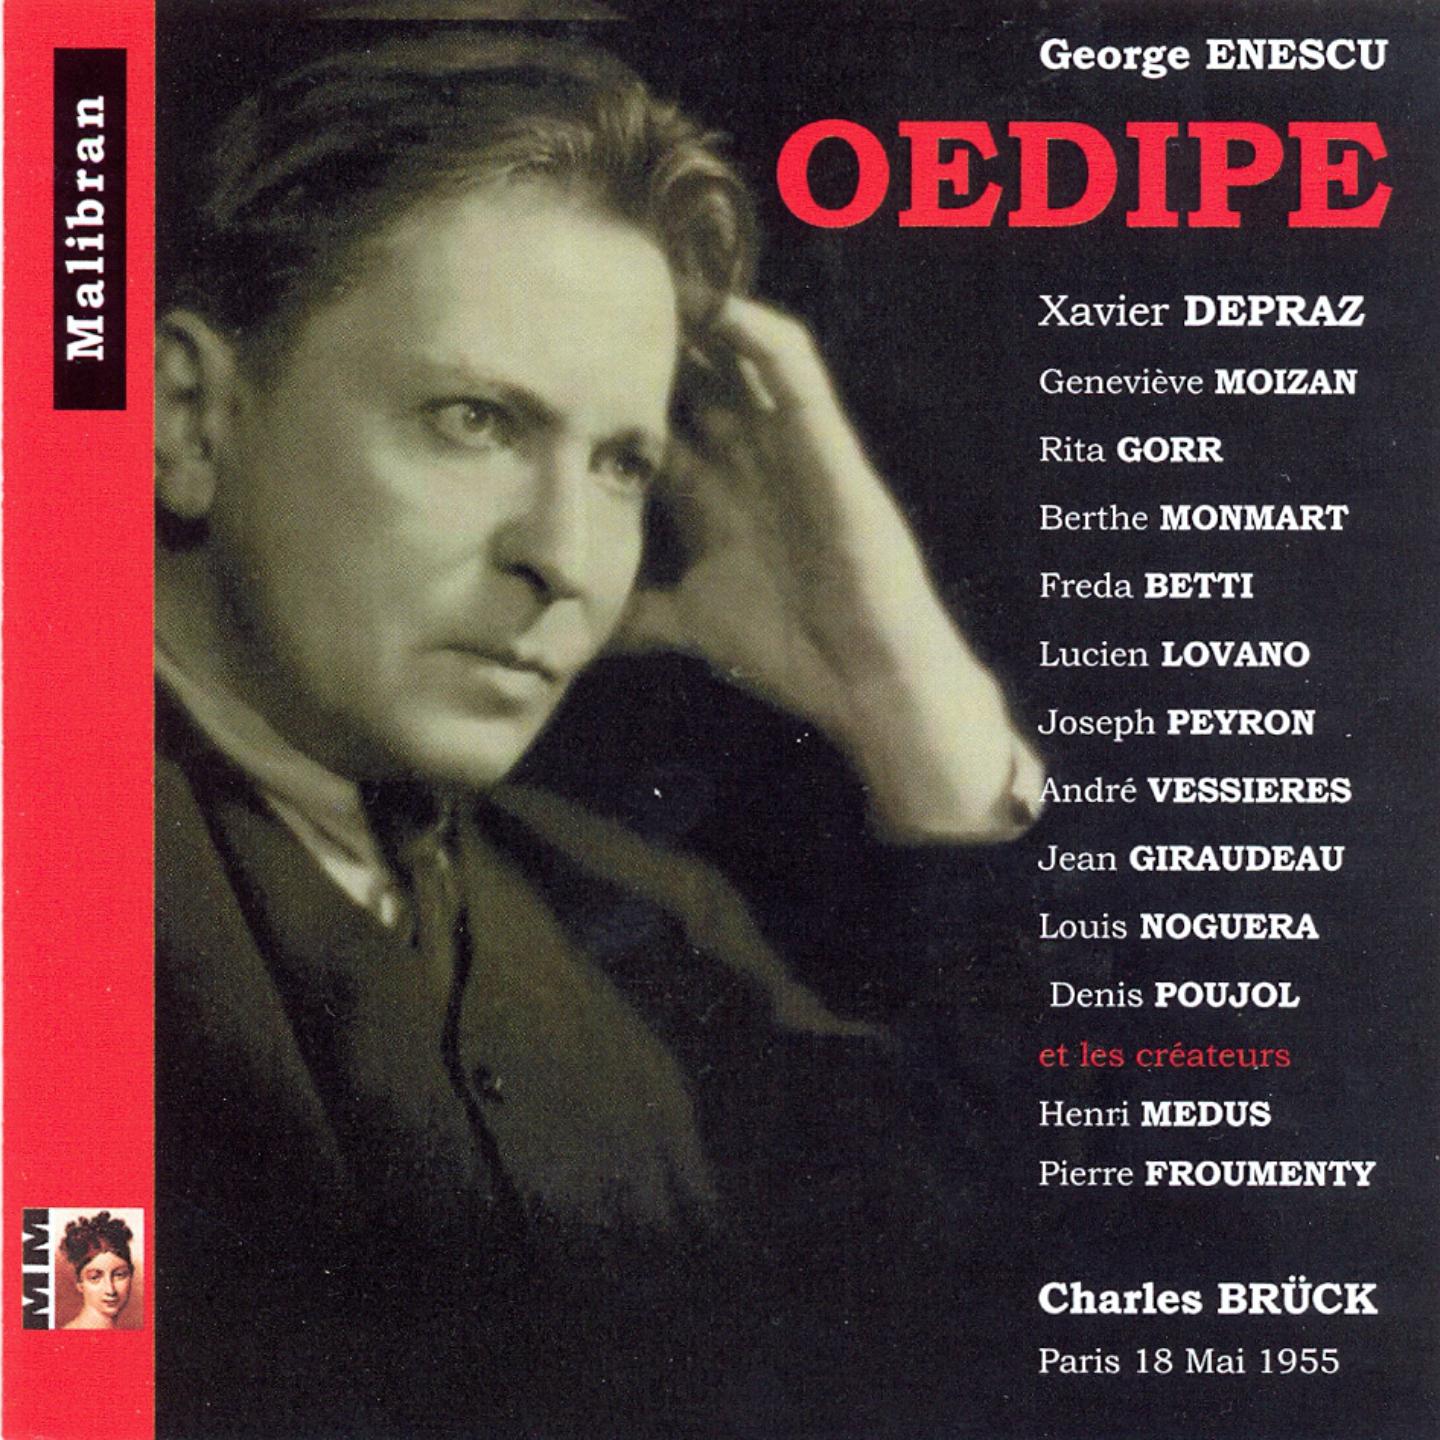 Oedipe, Act I: Pre lude